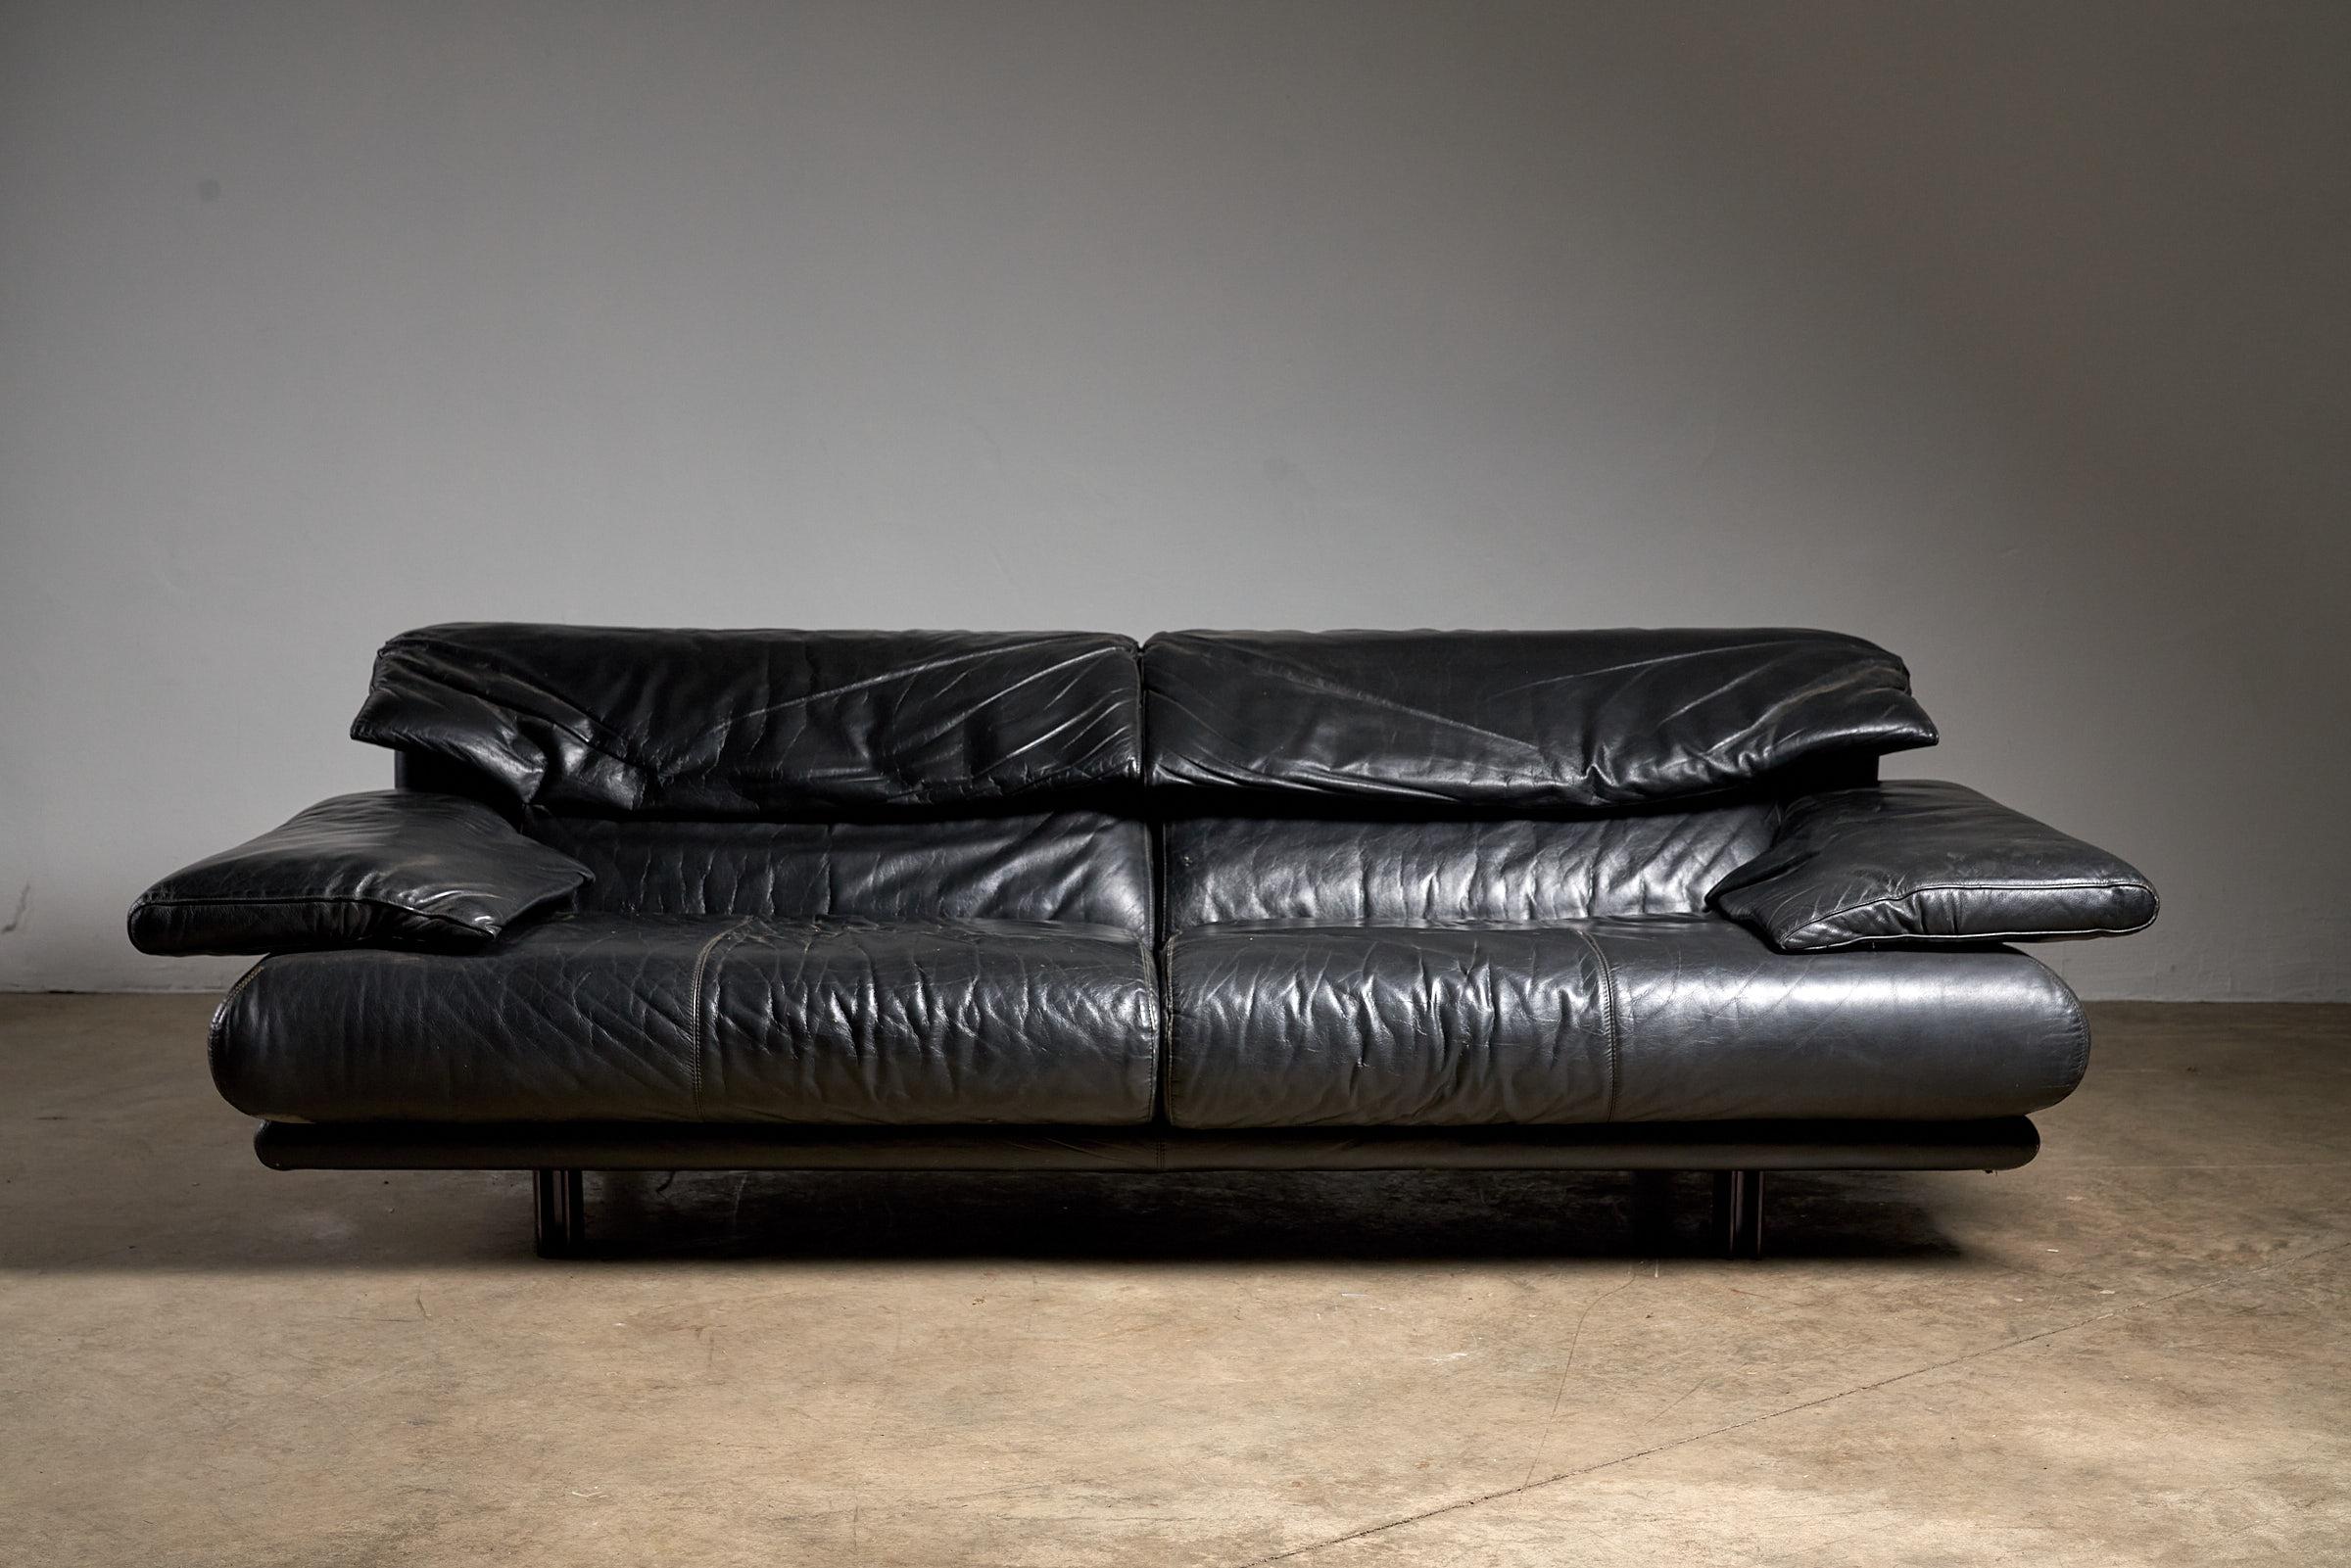 Immerse yourself in luxury with the Alanda sofa, designed by Paolo Piva for B&B Italia. This exquisite piece showcases timeless elegance in black leather. The geometric design and leather upholstery make it a statement piece, perfect for both